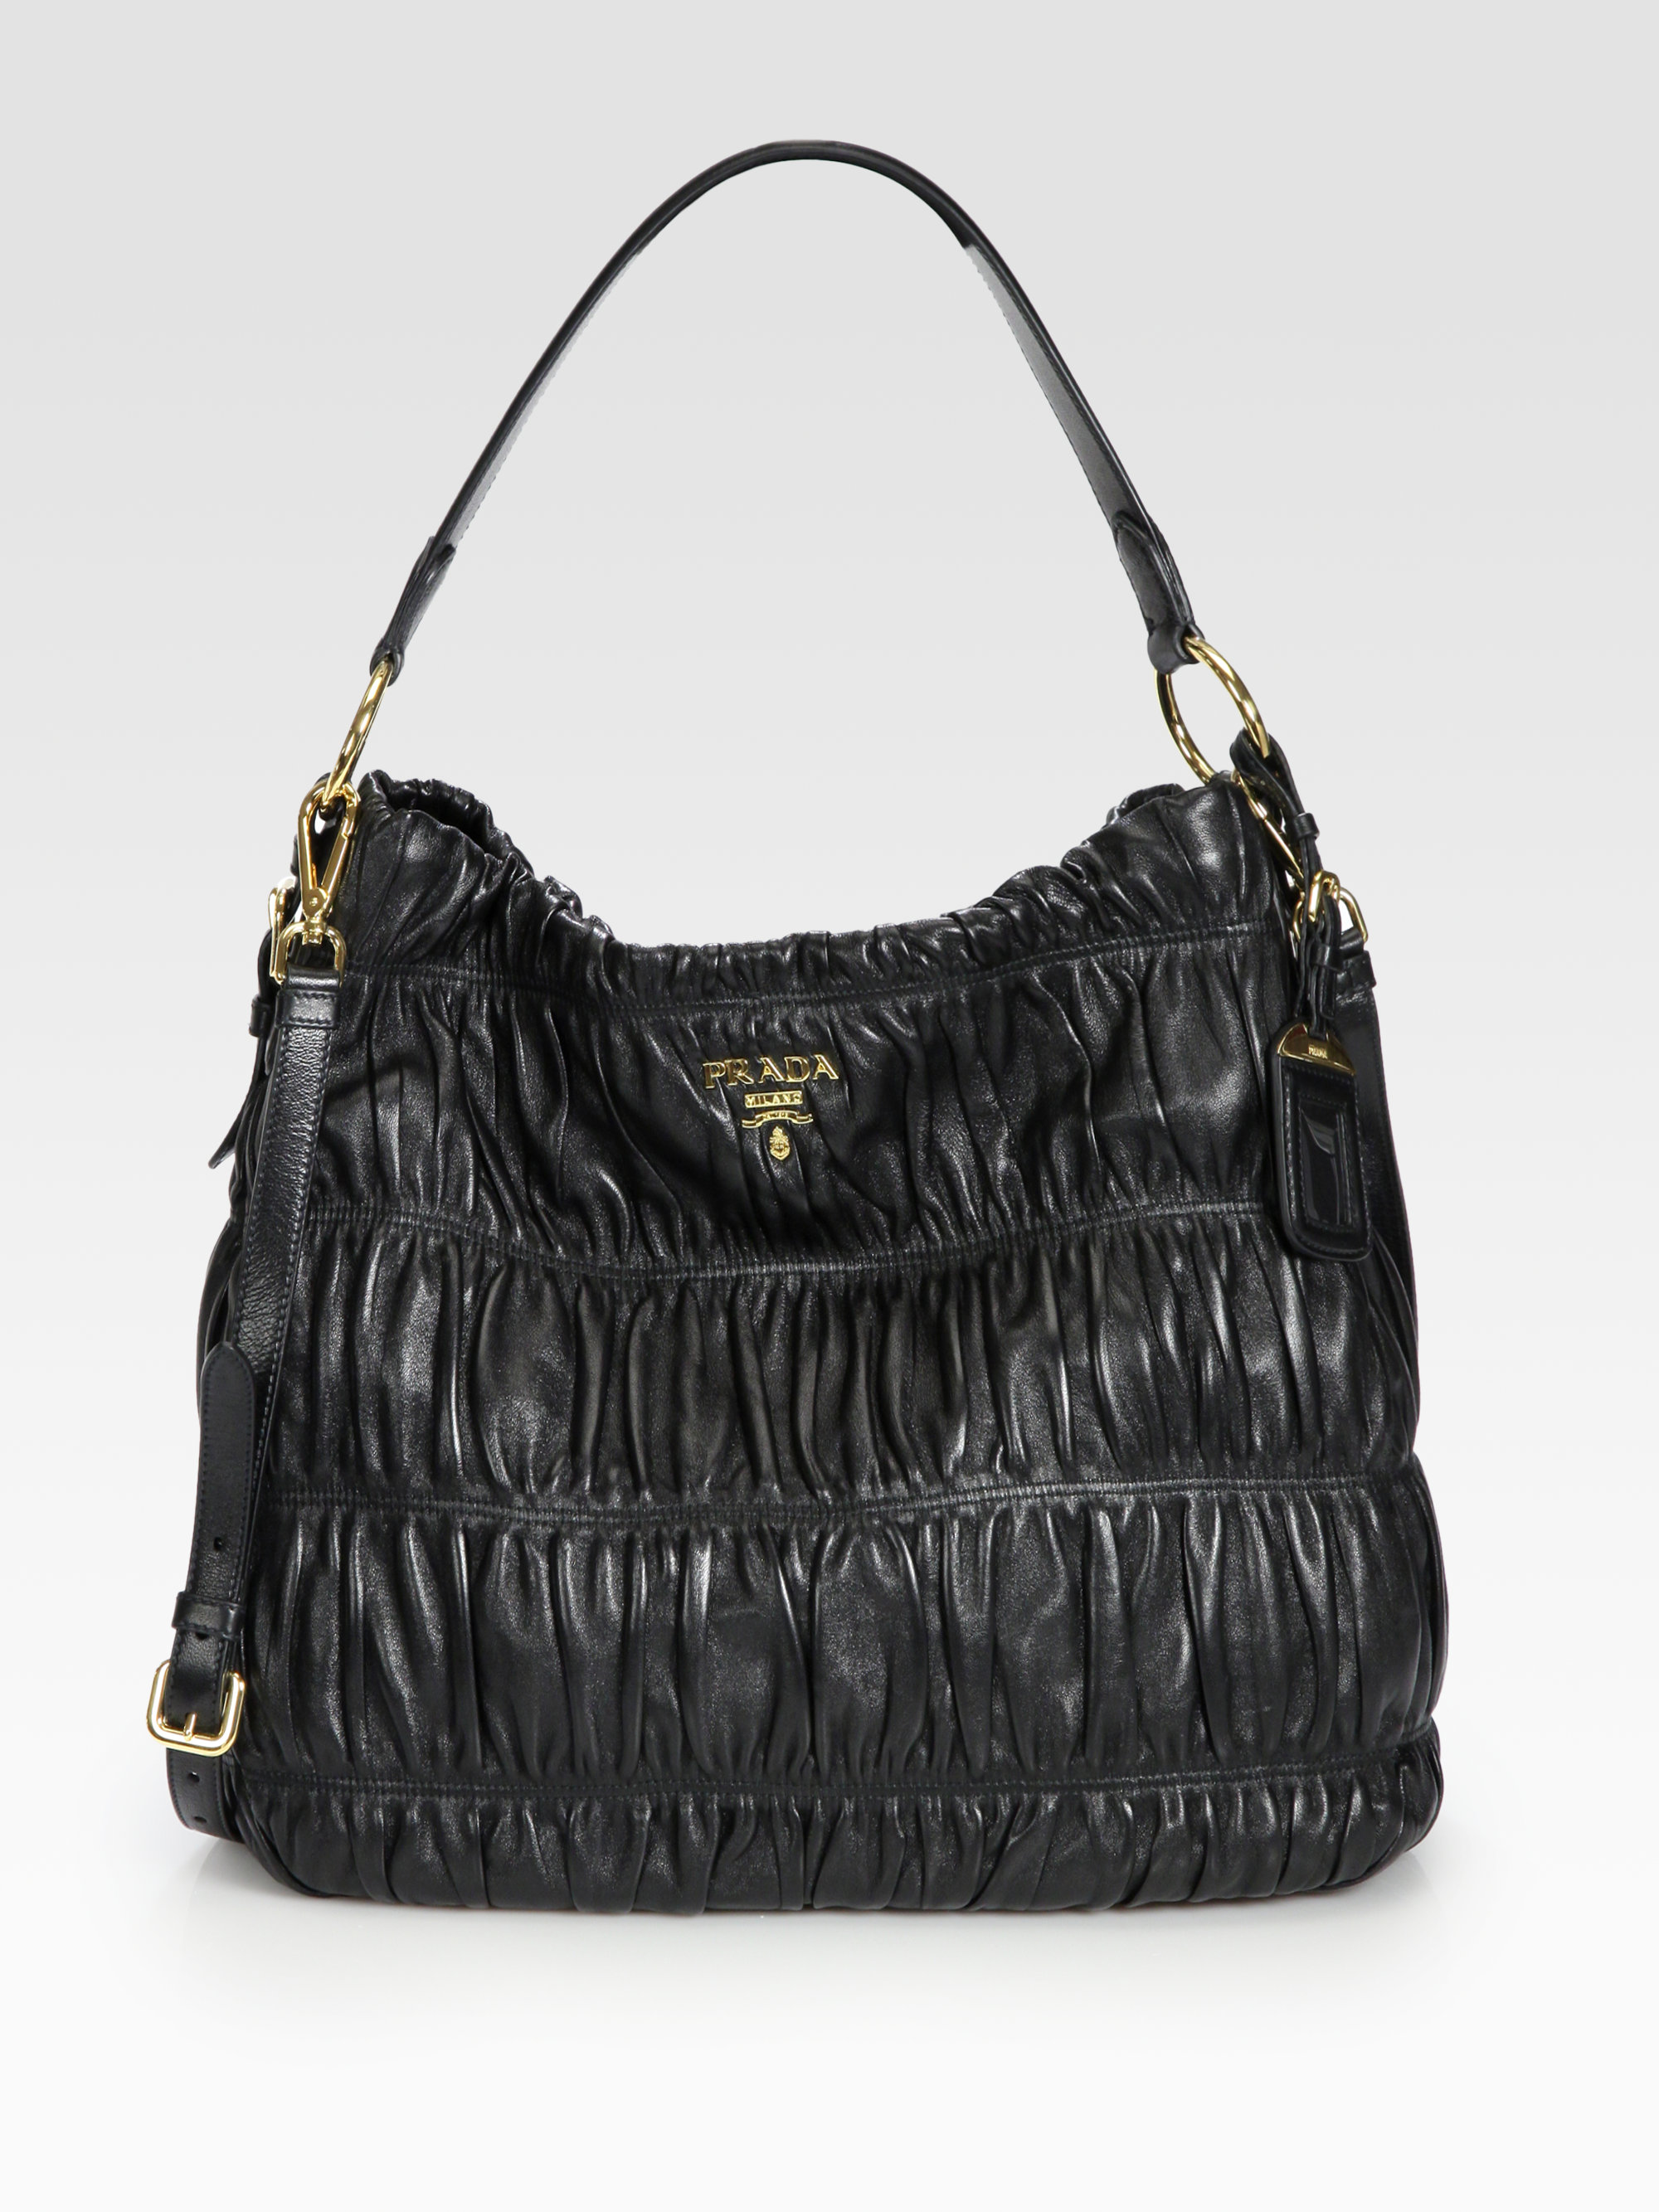 Prada Nappa Gaufre Ruched Leather Hobo in Black - Lyst